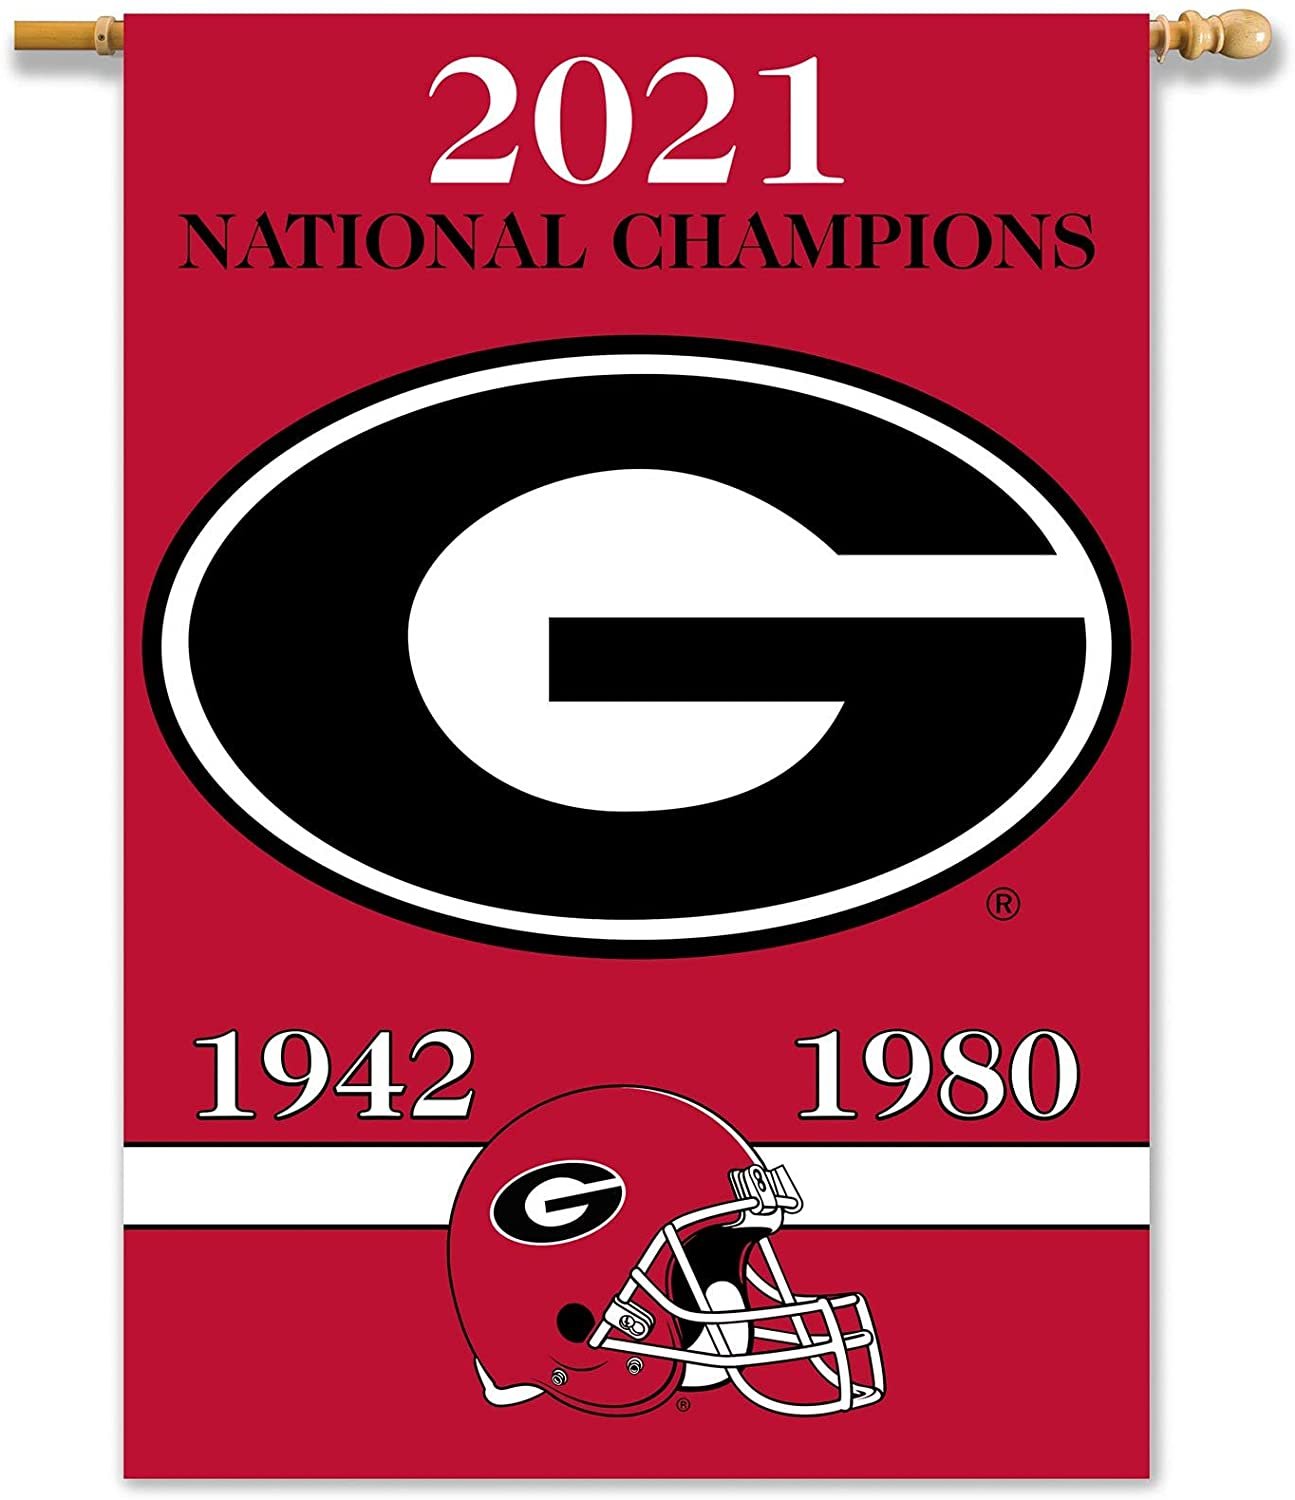 BSI PRODUCTS, INC. - Georgia Bulldogs 2021 National Football Champions 2-Sided 28"x40" Banner w/ Pole Sleeve - UGA Championship Years - High Durability for Indoor and Outdoor Use - Great Gift Idea